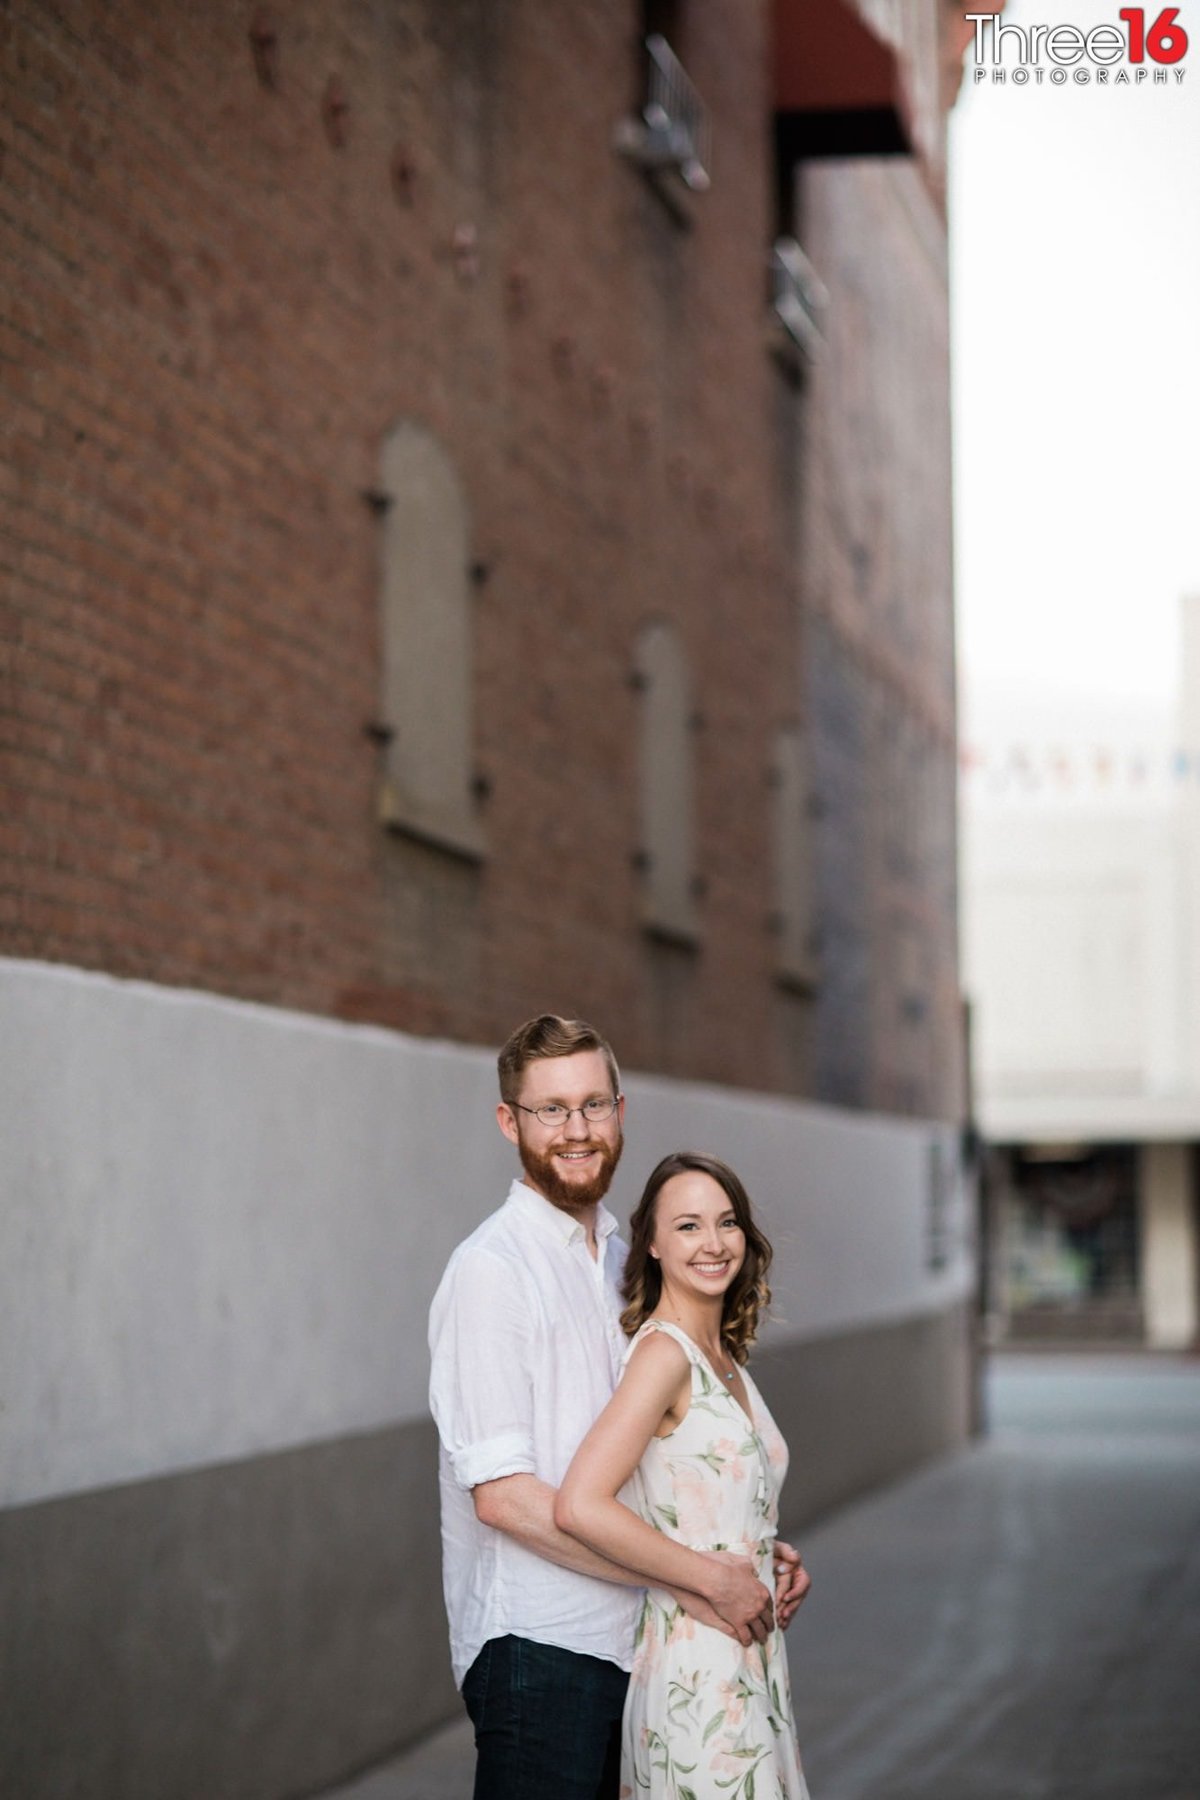 Groom to be embraces his fiance from behind in an alleyway